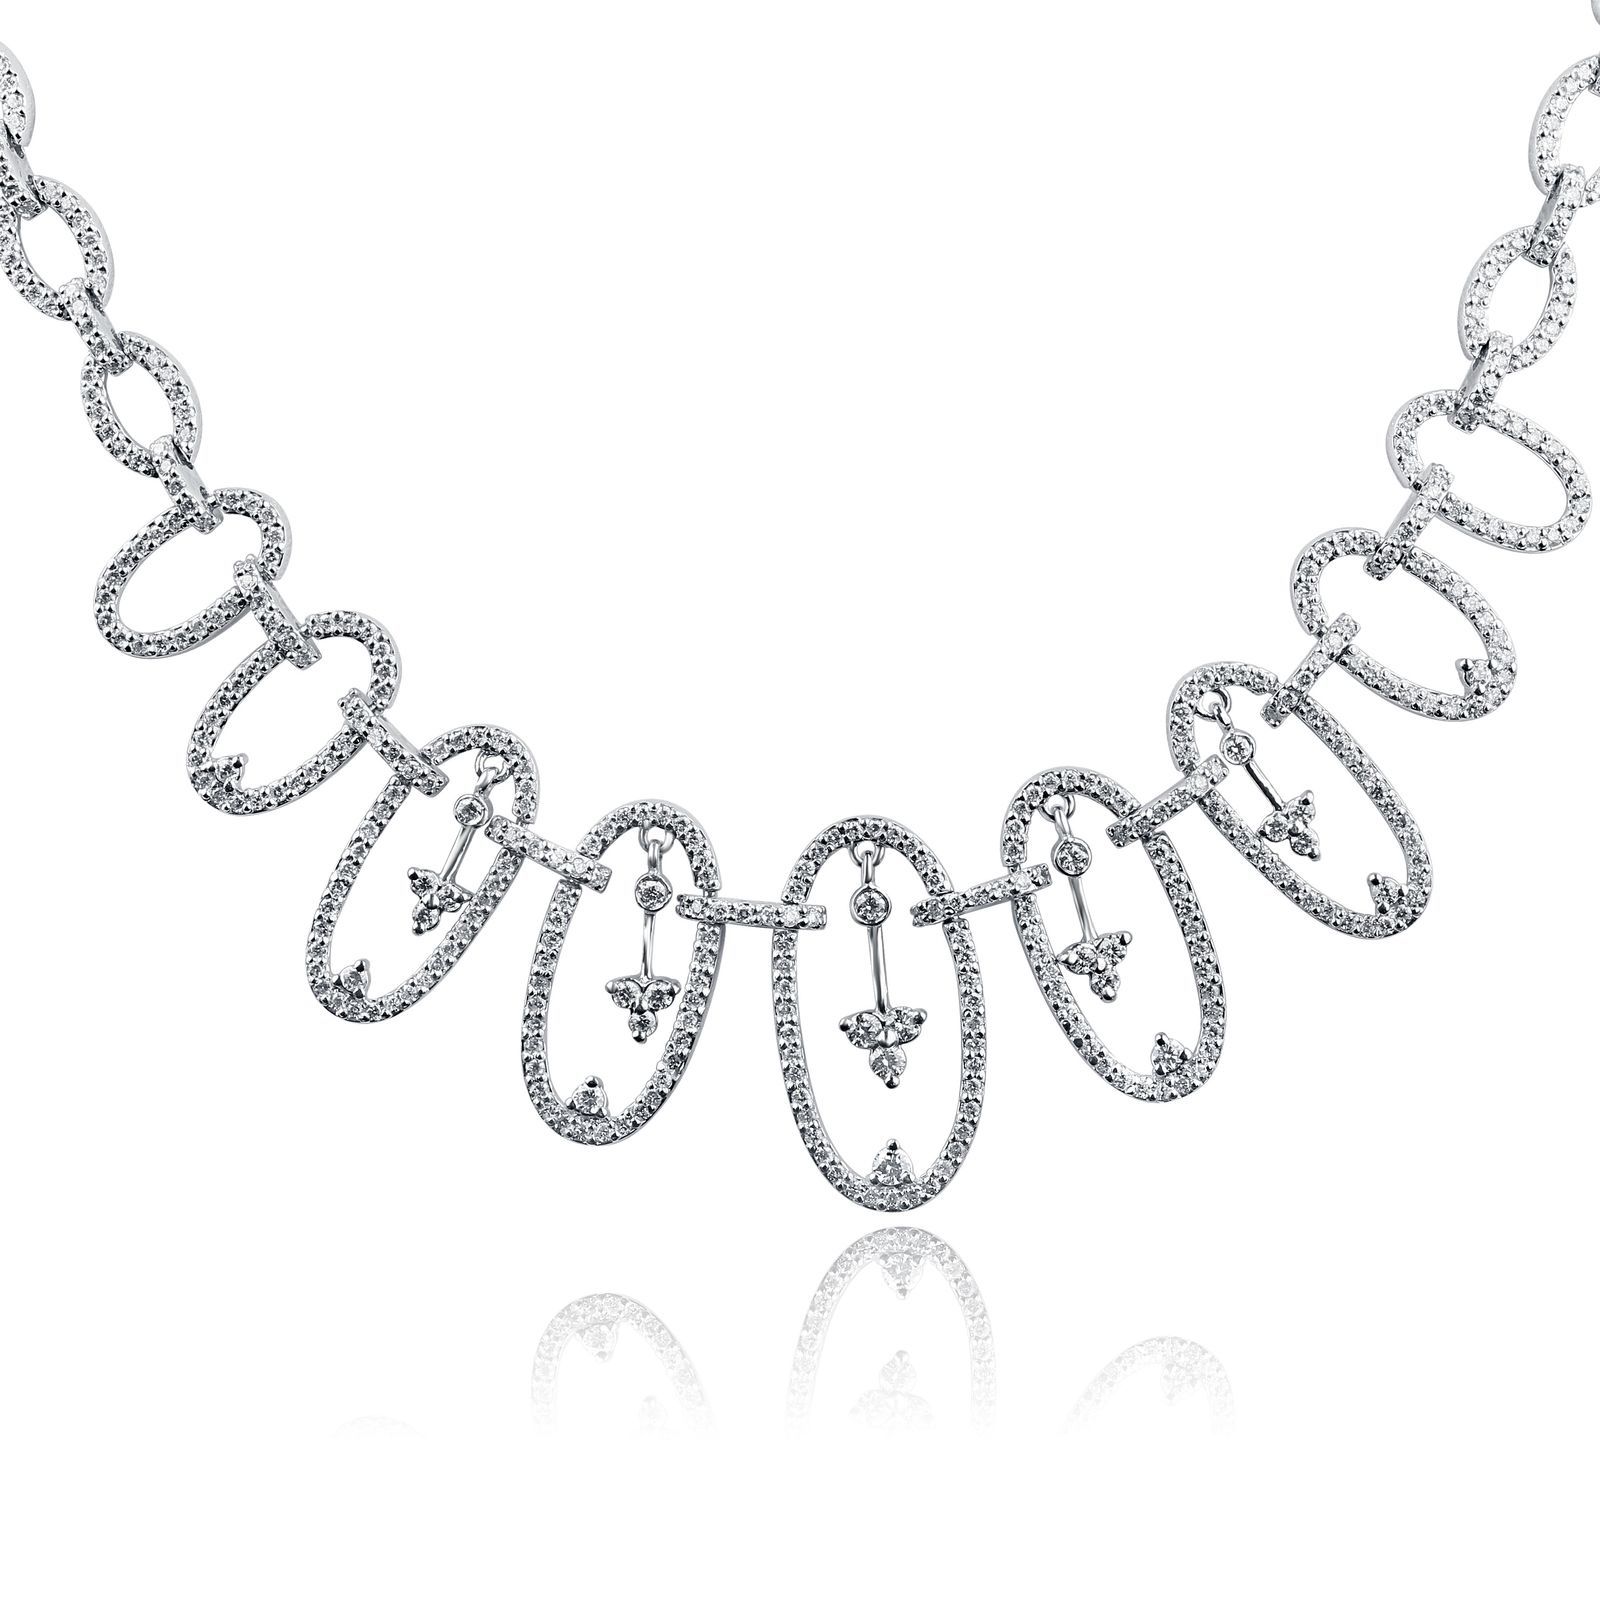 Primary image for Women's Necklace 2.70 Ct Round Genuine Diamond  Oval Links 14k White Gold 18"